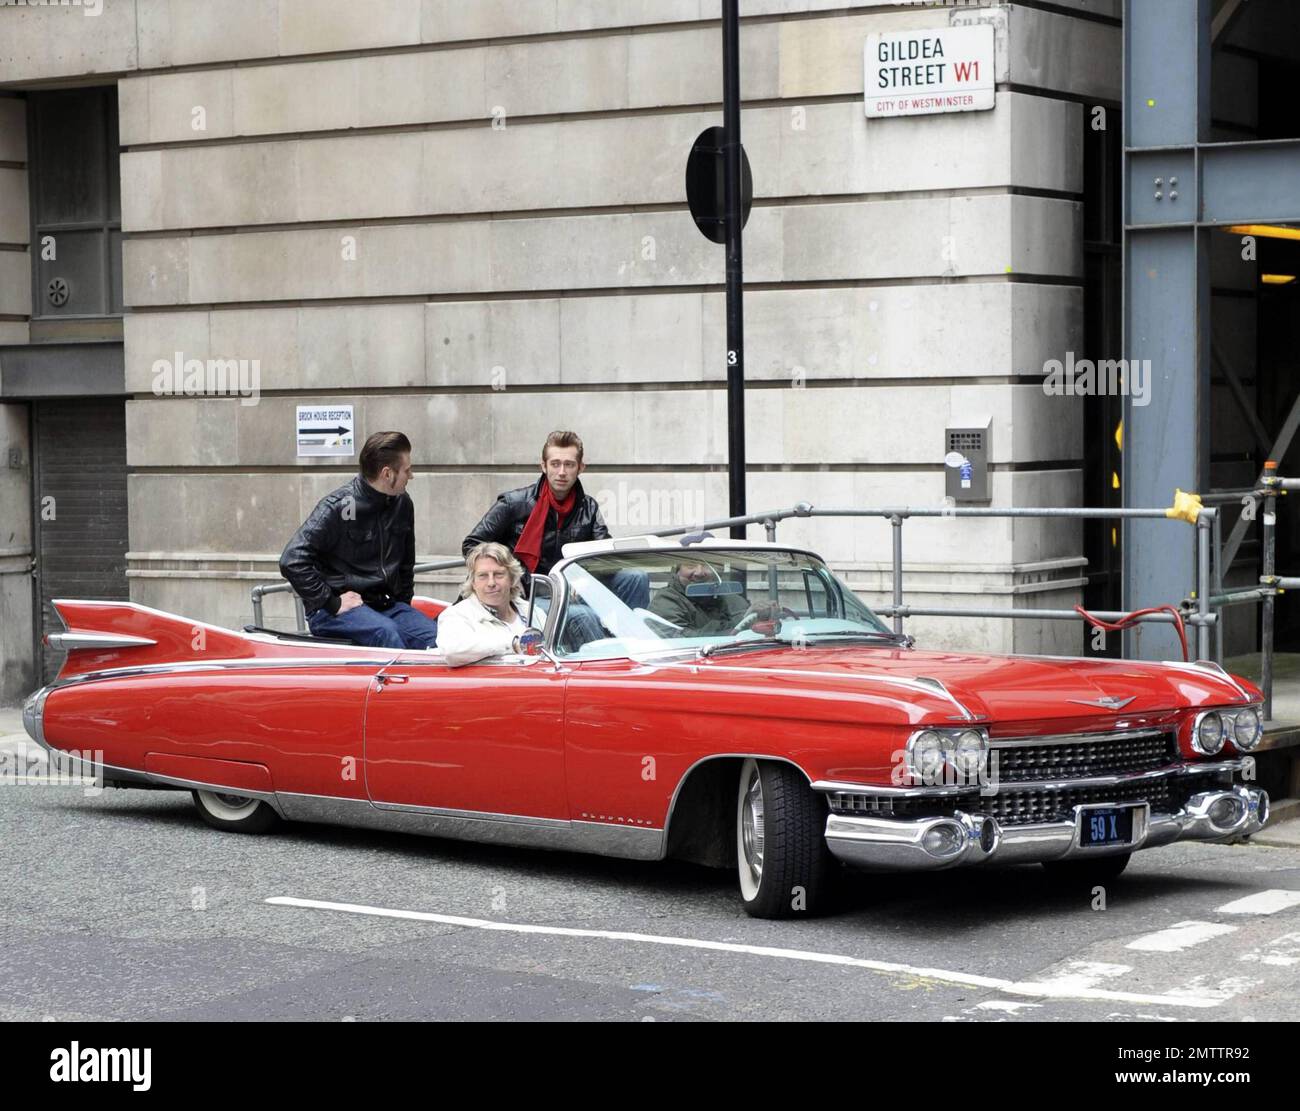 Berlin-bred rockabilly musicians The Baseballs pose in their classic red convertible Cadillac outside the BBC Radio 2 studios after promoting their new album Strike.  The trio, Sam, Digger and Basti, are known for covering popular songs and revamping them with a 50s-style rock twist.  According to reports the group also treated passersby to an impromptu version of Rihanna's song 'Umbrella'.  London, UK. 05/11/10. Stock Photo